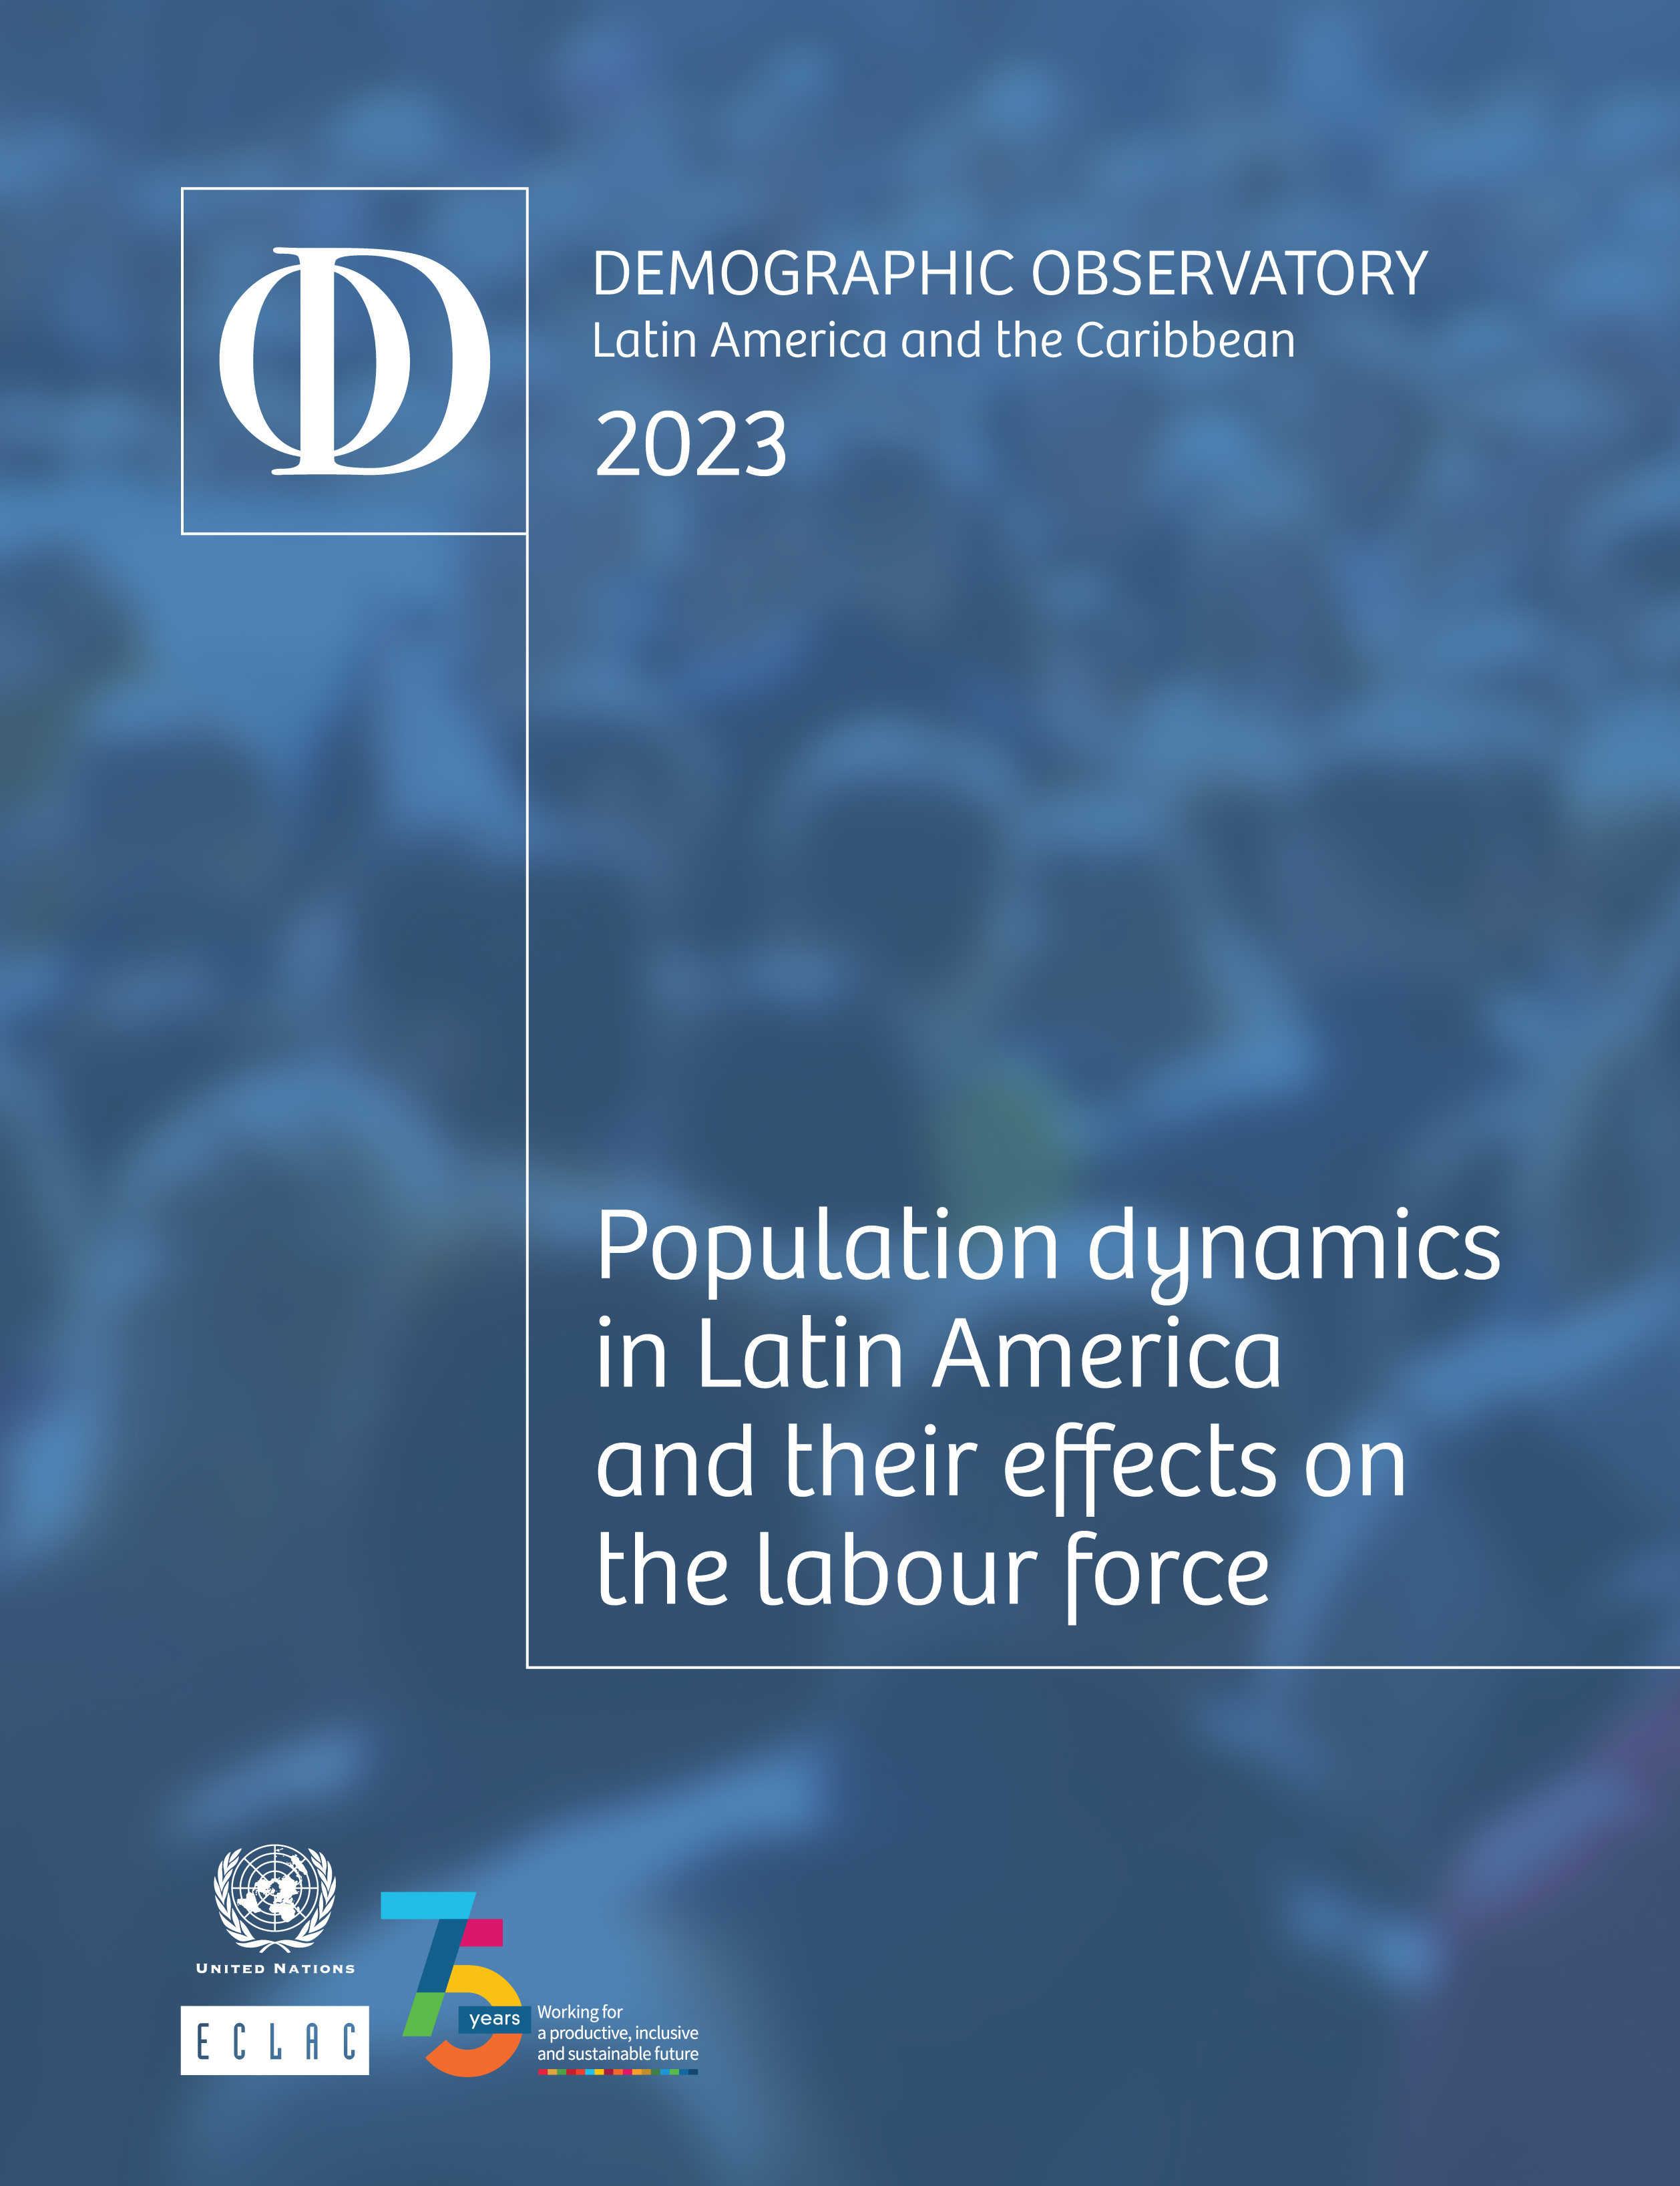 image of Latin America and the Caribbean Demographic Observatory 2023